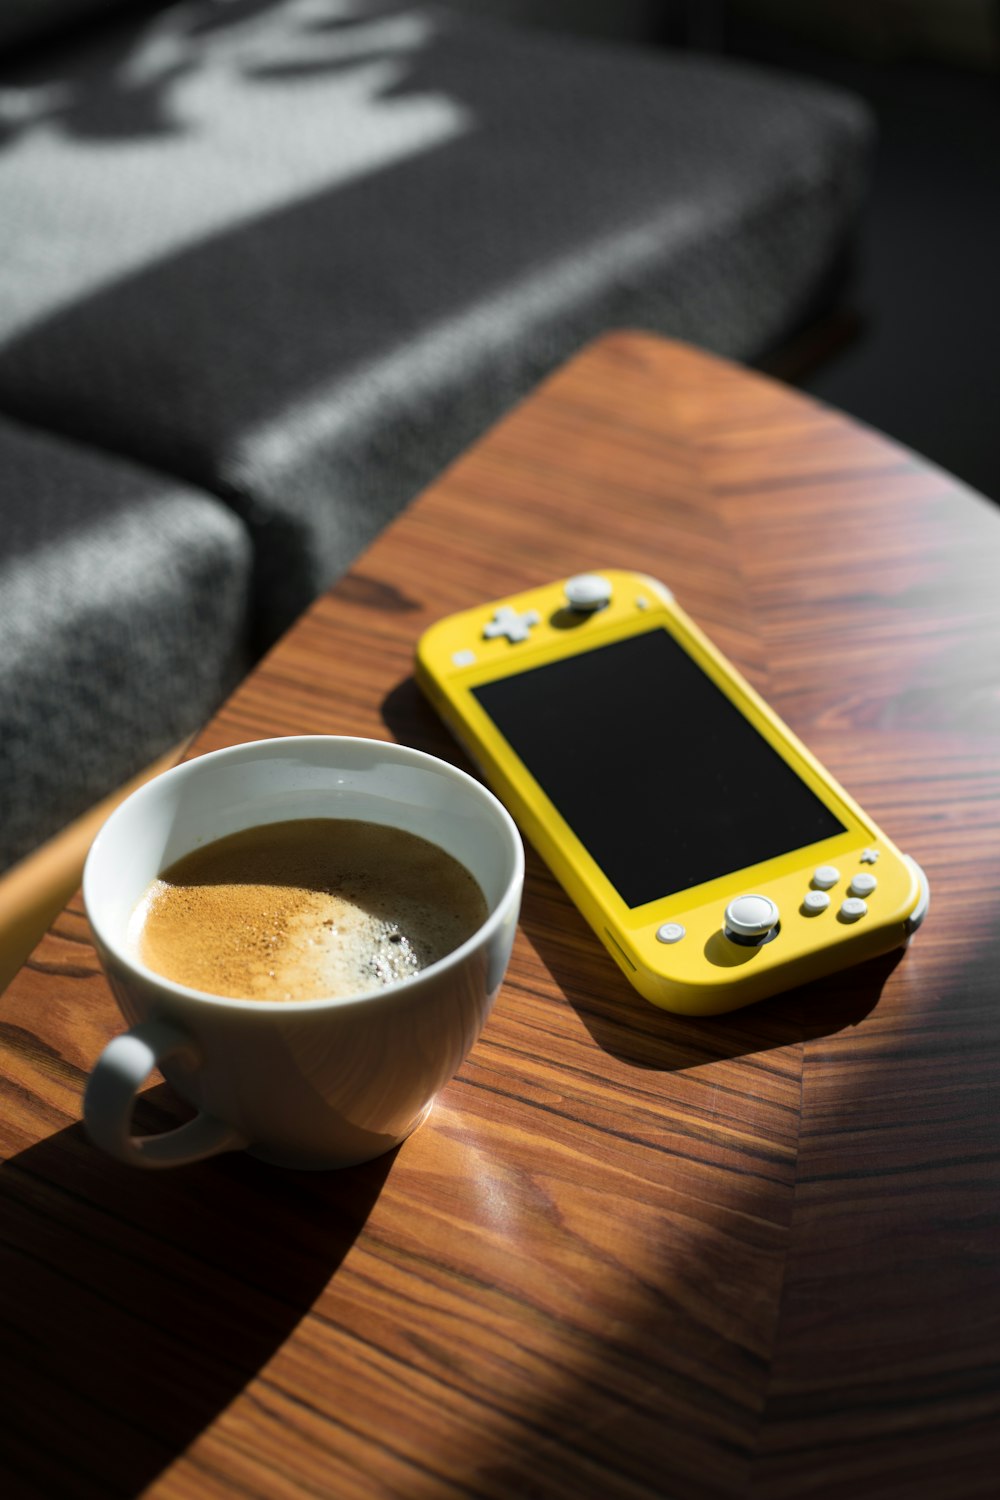 yellow iphone 5 c beside white ceramic mug on brown wooden table